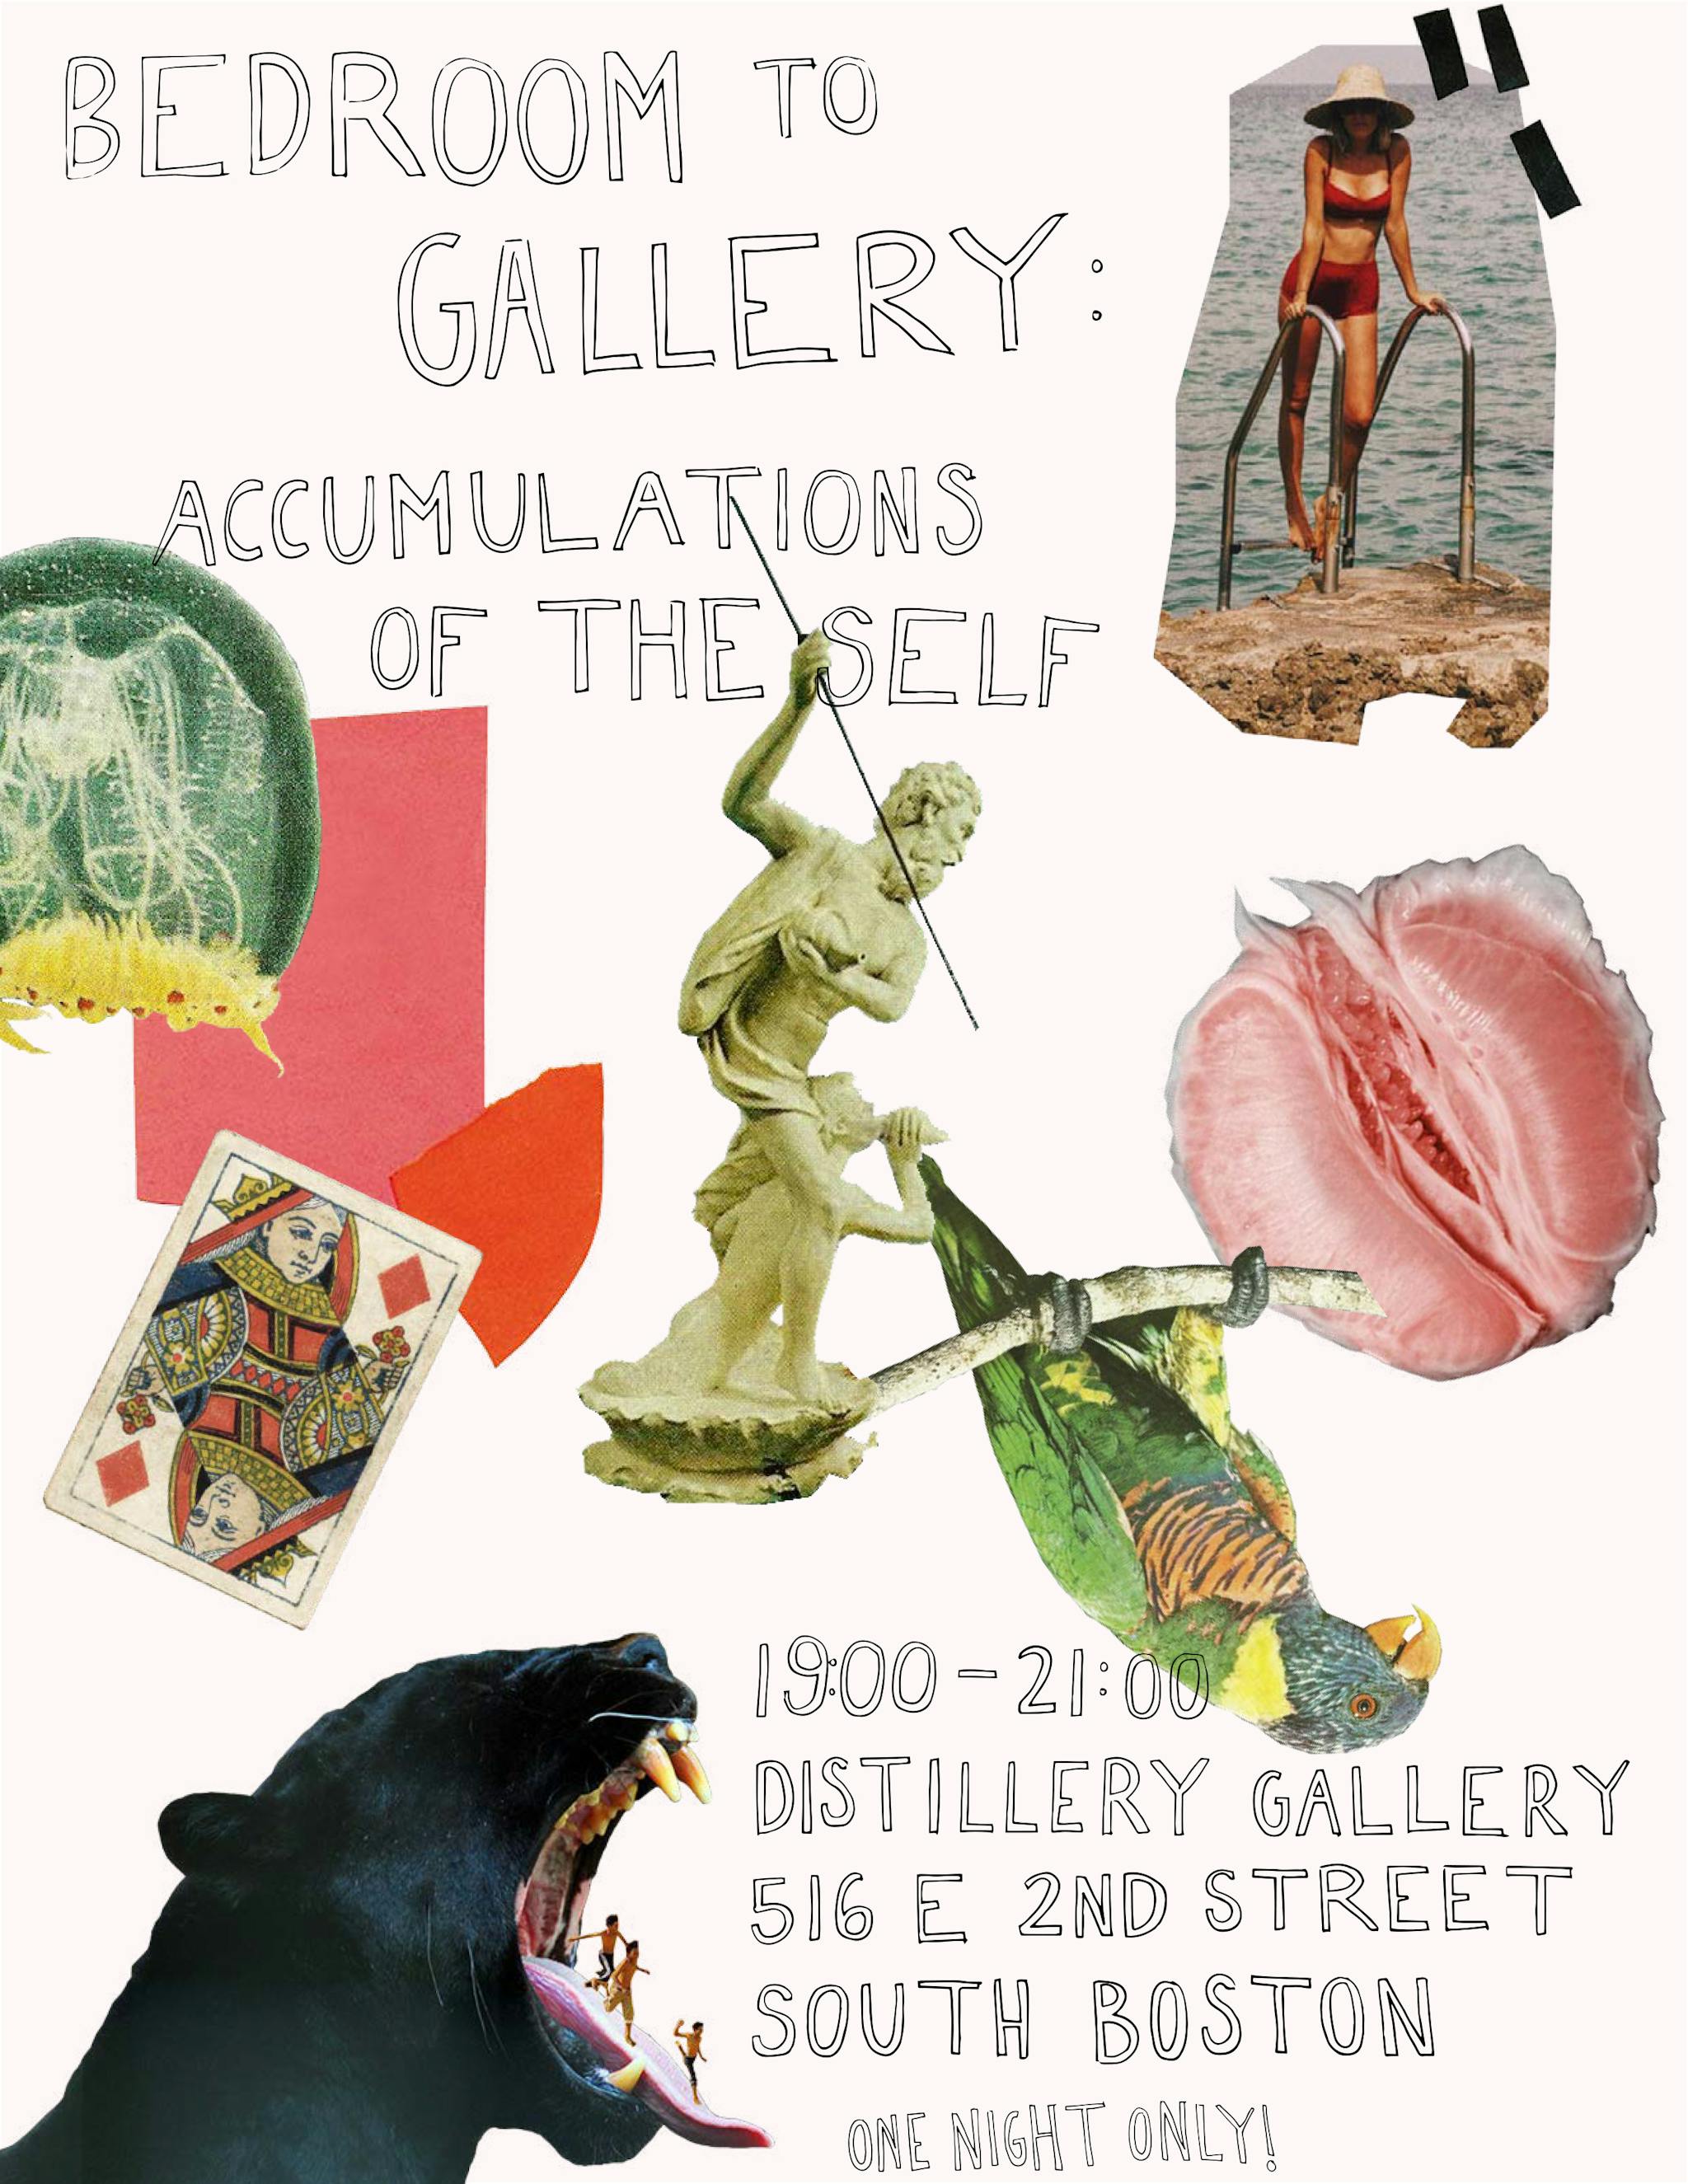 A flyer-like collage has various images on a light background, with "Bedroom to Gallery: Accumulations of the Self" in the top left corner and "19:00-21:00 Distillery Gallery 516 E 2nd Street South Boston One night only" on the bottom right corner.